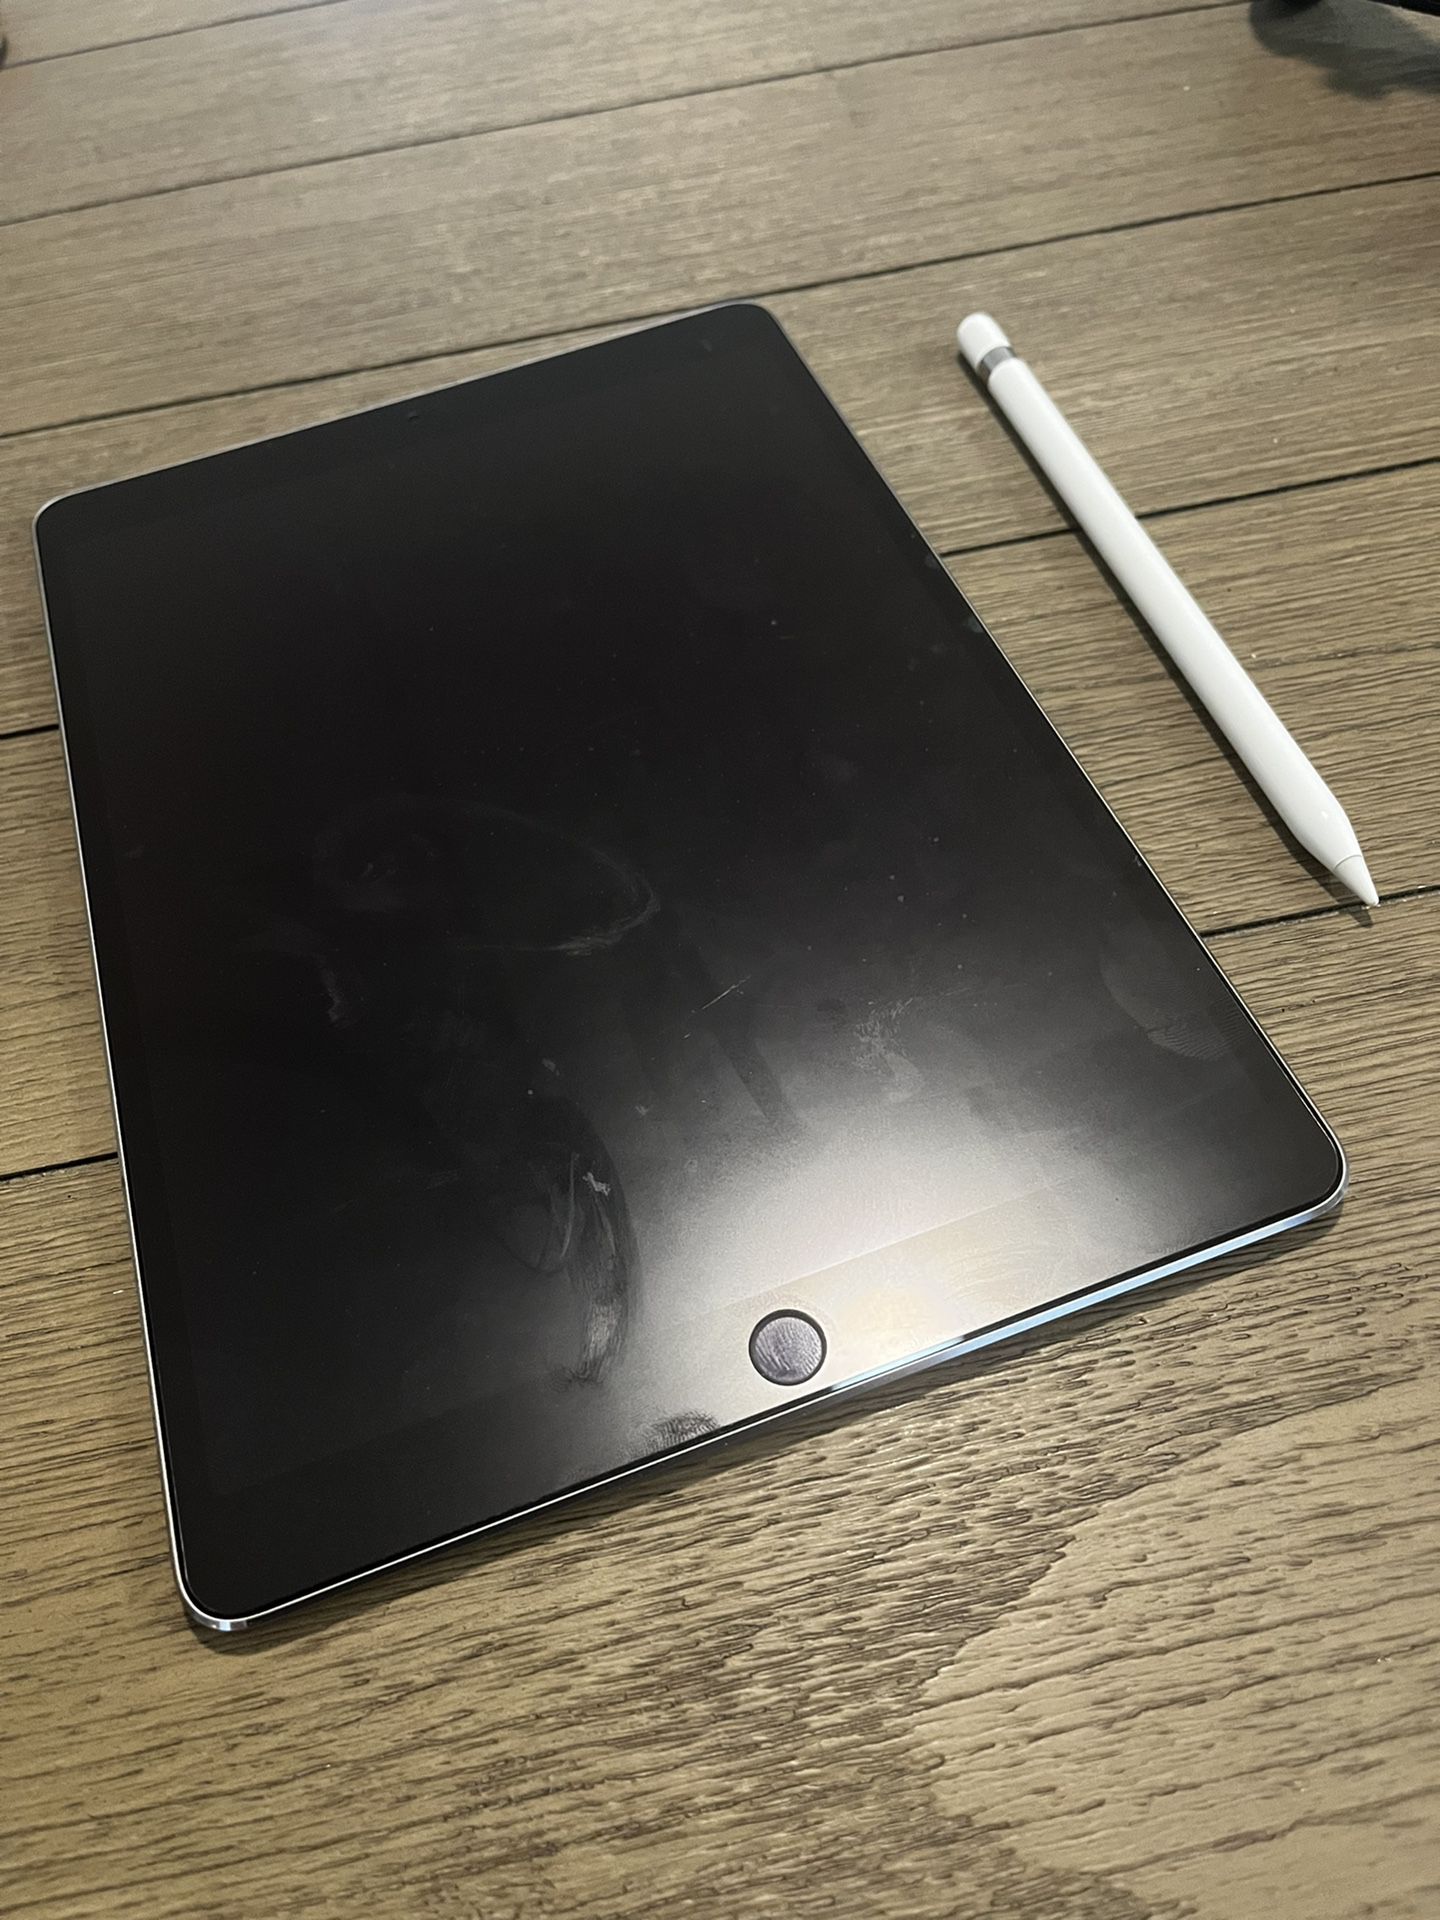 iPad Pro 10.5 inch 256GB (2nd Gen) with Apple Pencil (1st Gen) for